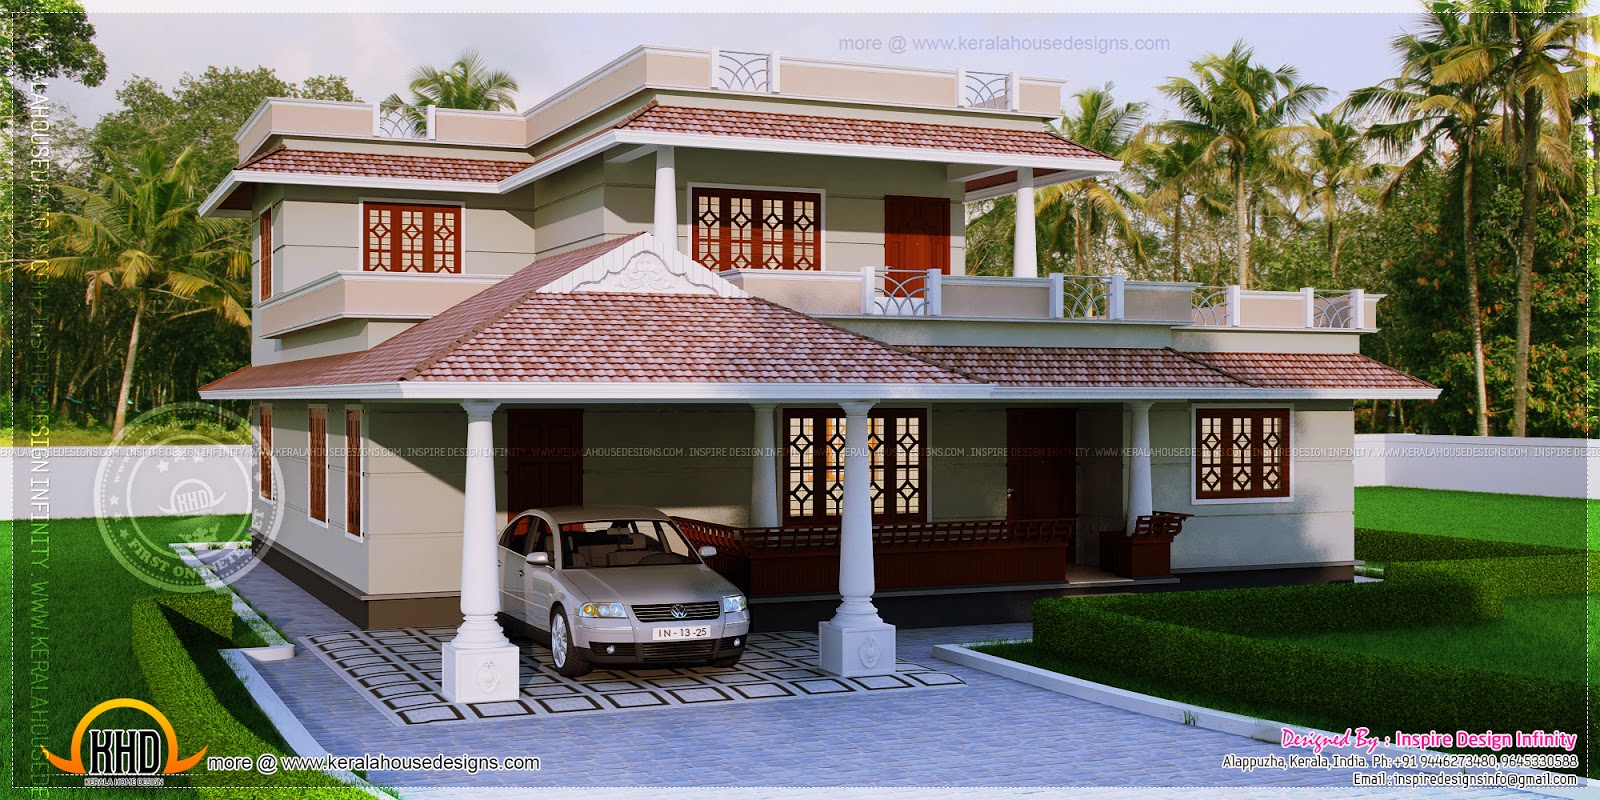 4 bedroom Kerala style house in 300 square yards Home ...